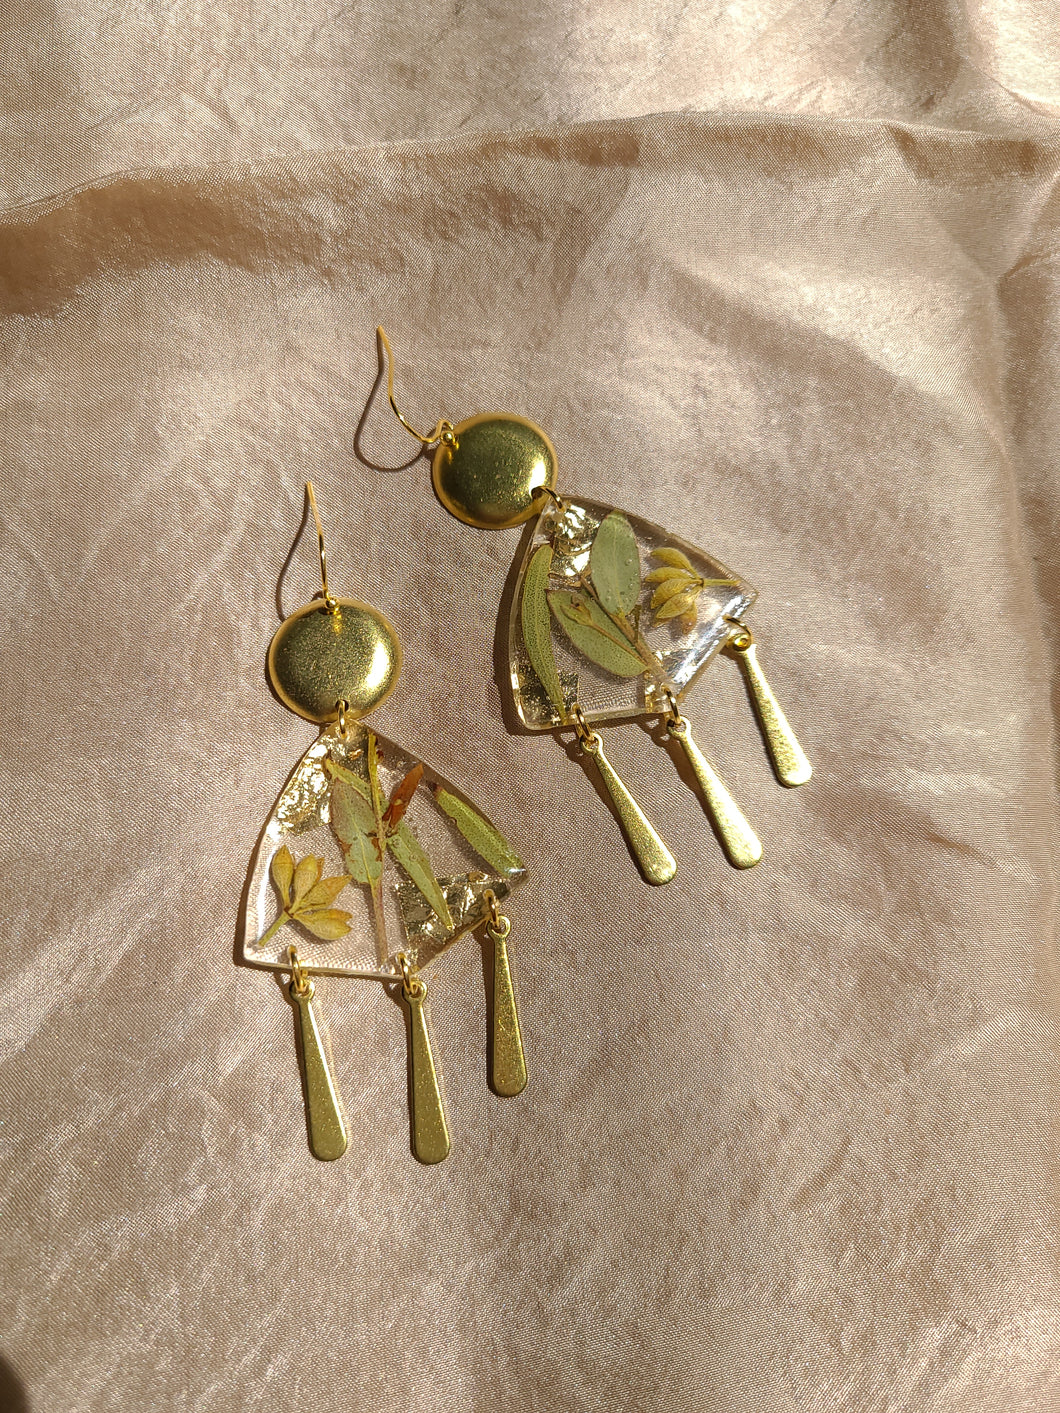 Spring collection-eycalyptus, real pressed flower in resin, hammered brass,